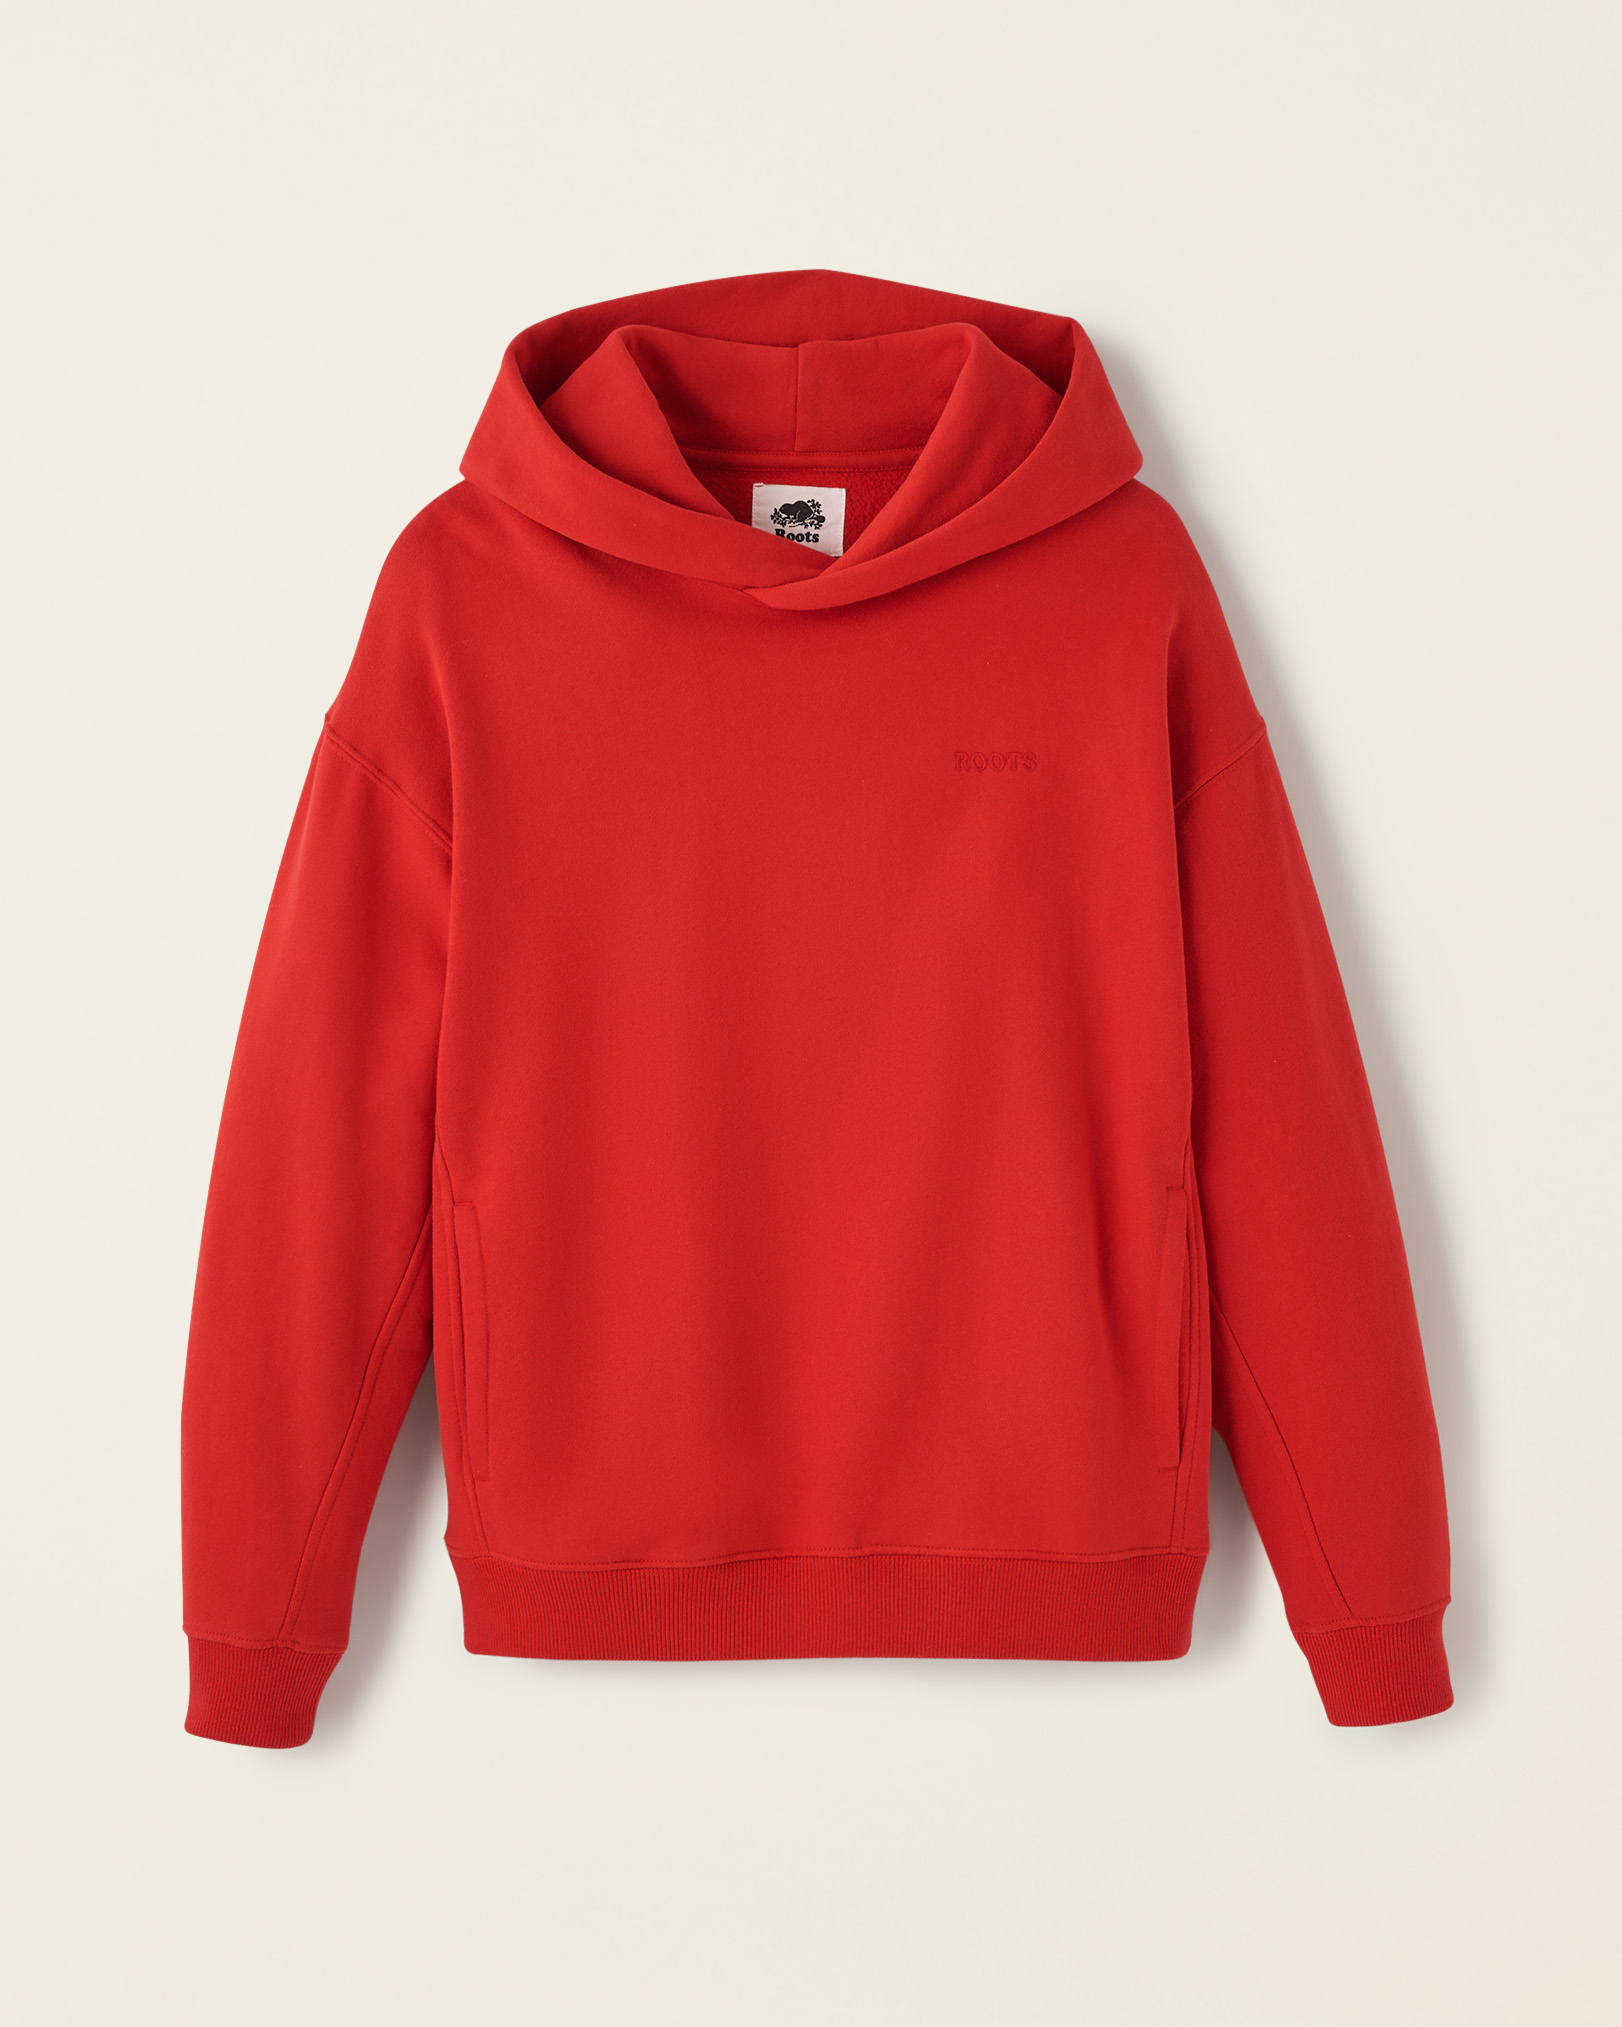 Roots One Hoodie in Goji Berry